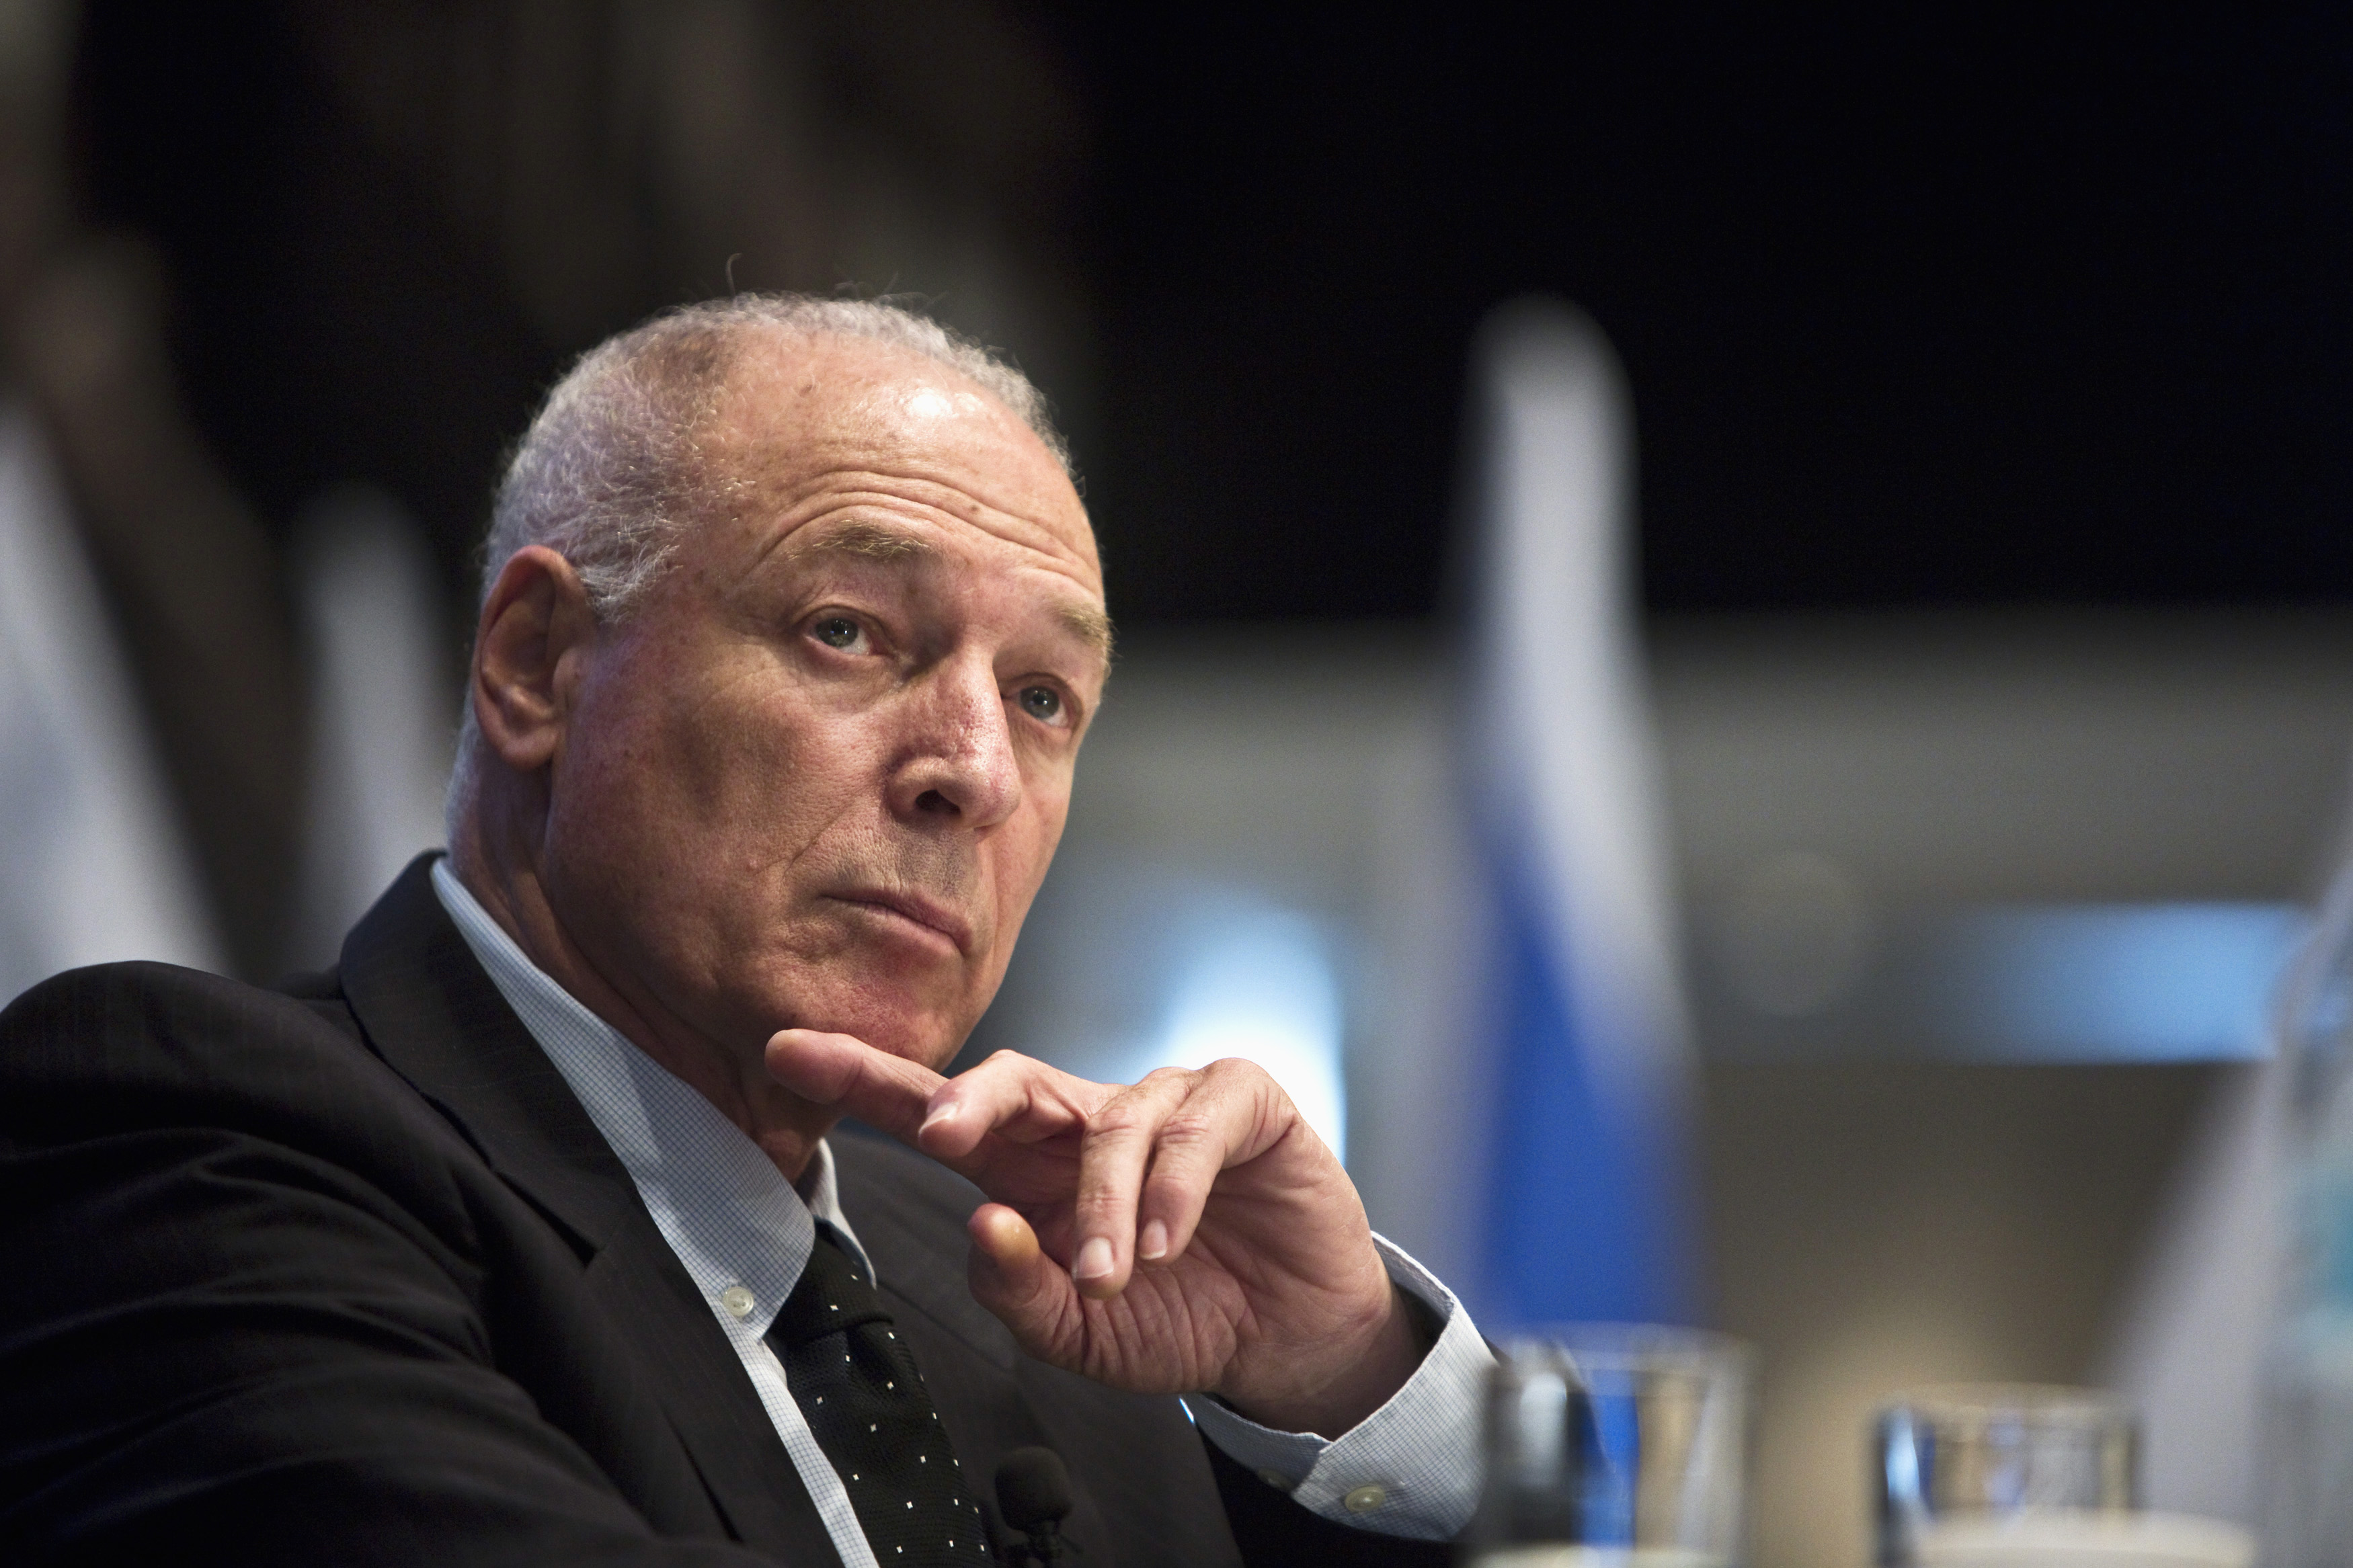 Amnon Neubach, the new chairman of the Tel Aviv Stock Exchange (TASE), attends a news conference in Tel Aviv